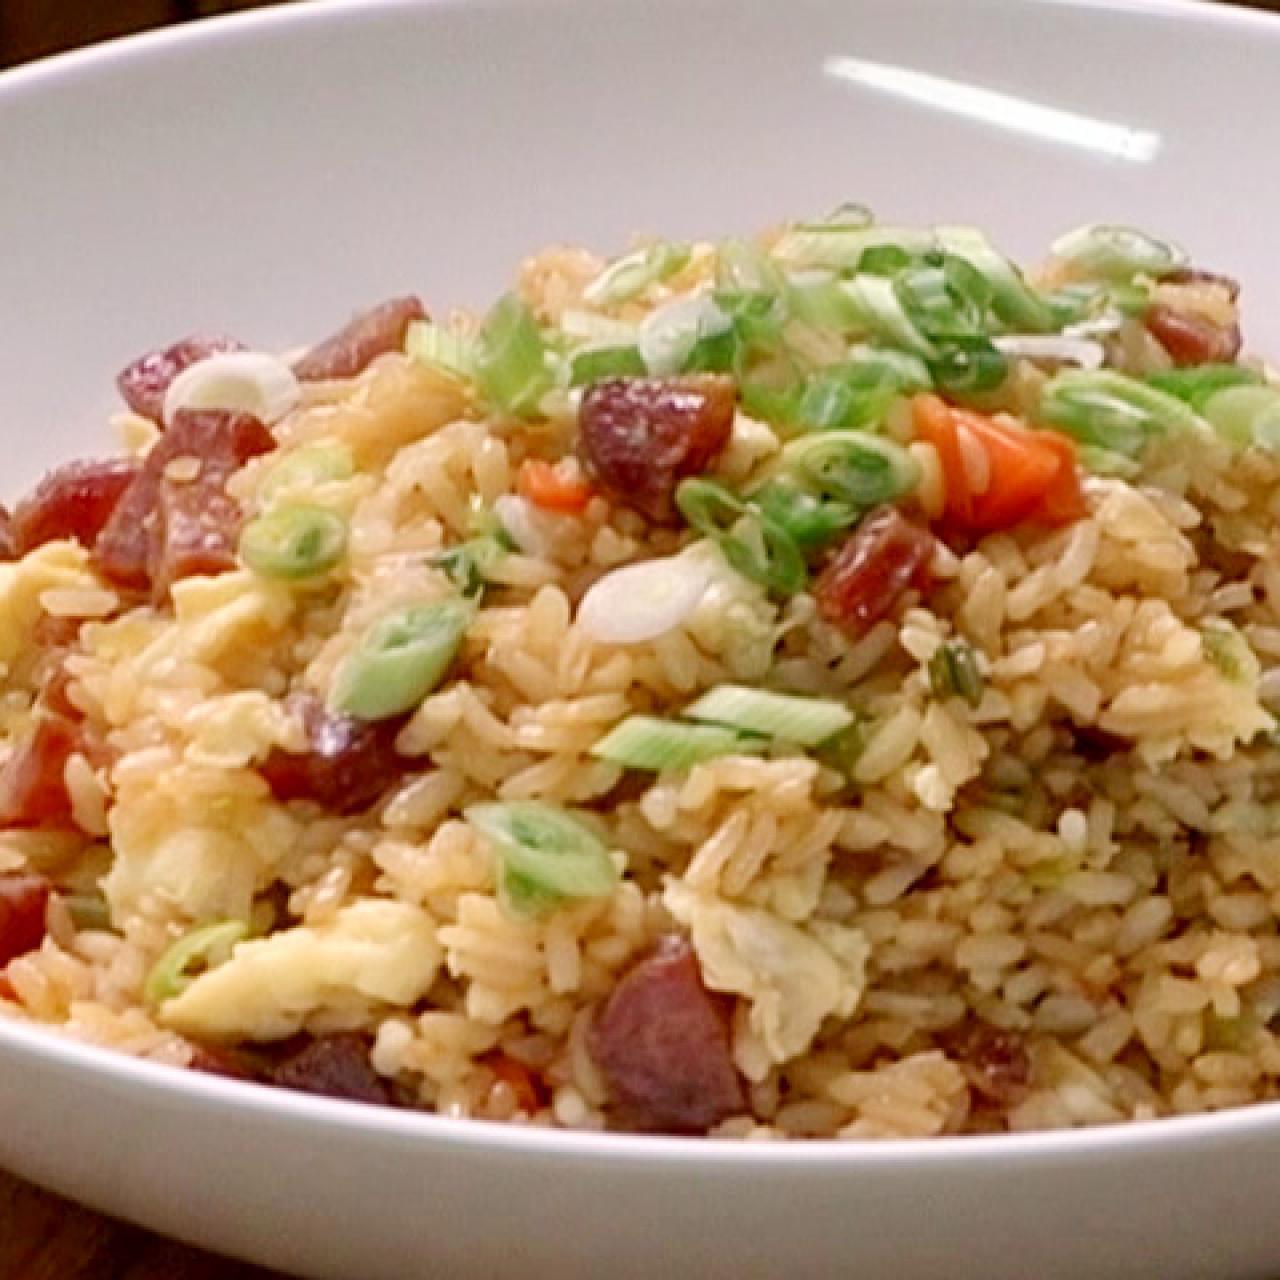 https://food.fnr.sndimg.com/content/dam/images/food/fullset/2010/3/24/0/BZ0202_fried-rice-with-chinese-sausage_s4x3.jpg.rend.hgtvcom.1280.1280.suffix/1371591399560.jpeg